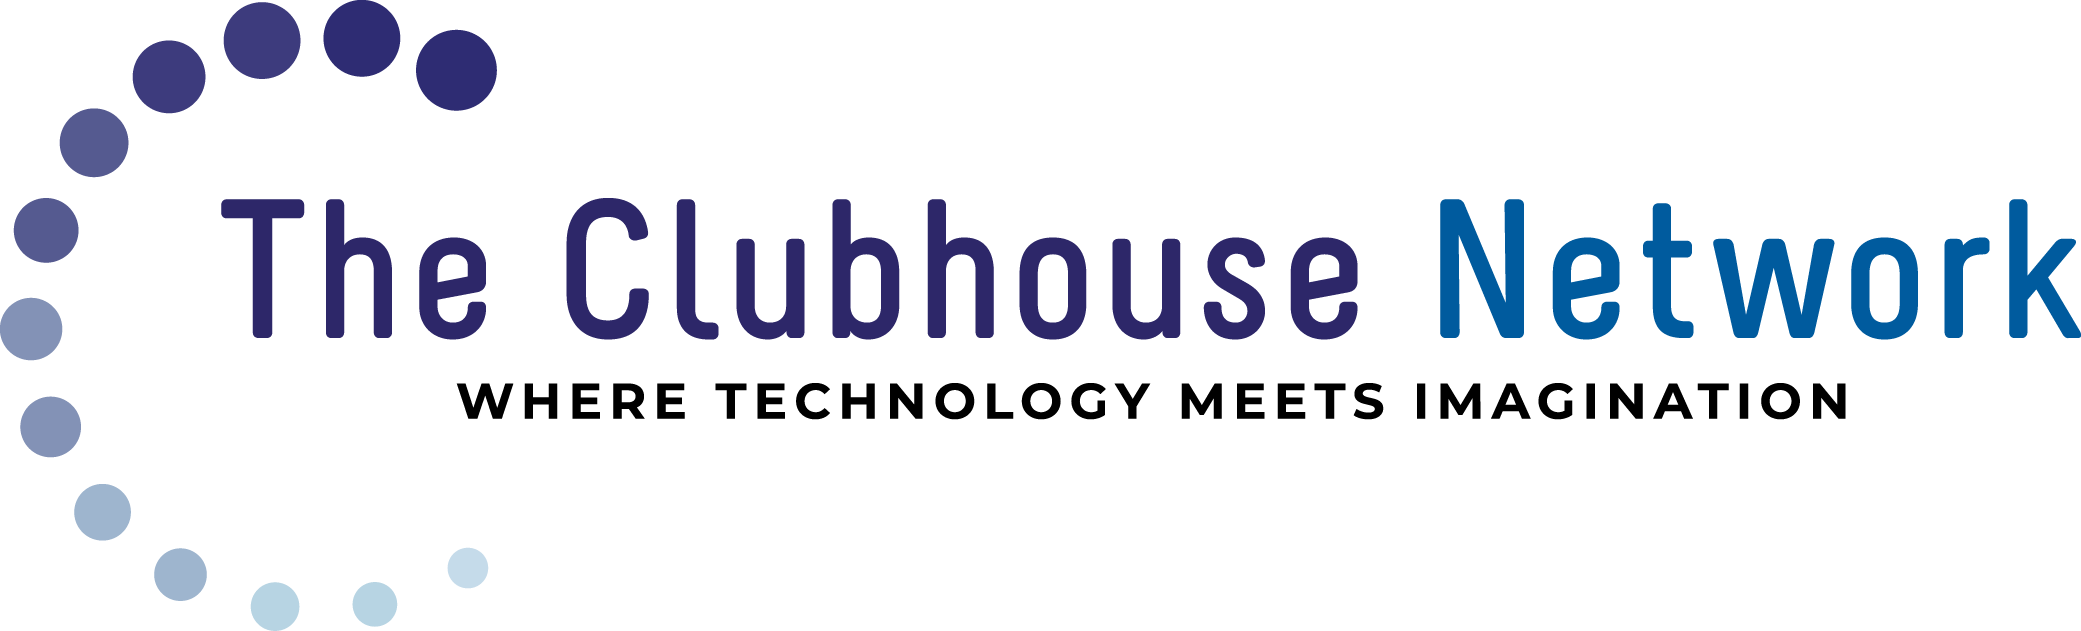 The Clubhouse Network logo